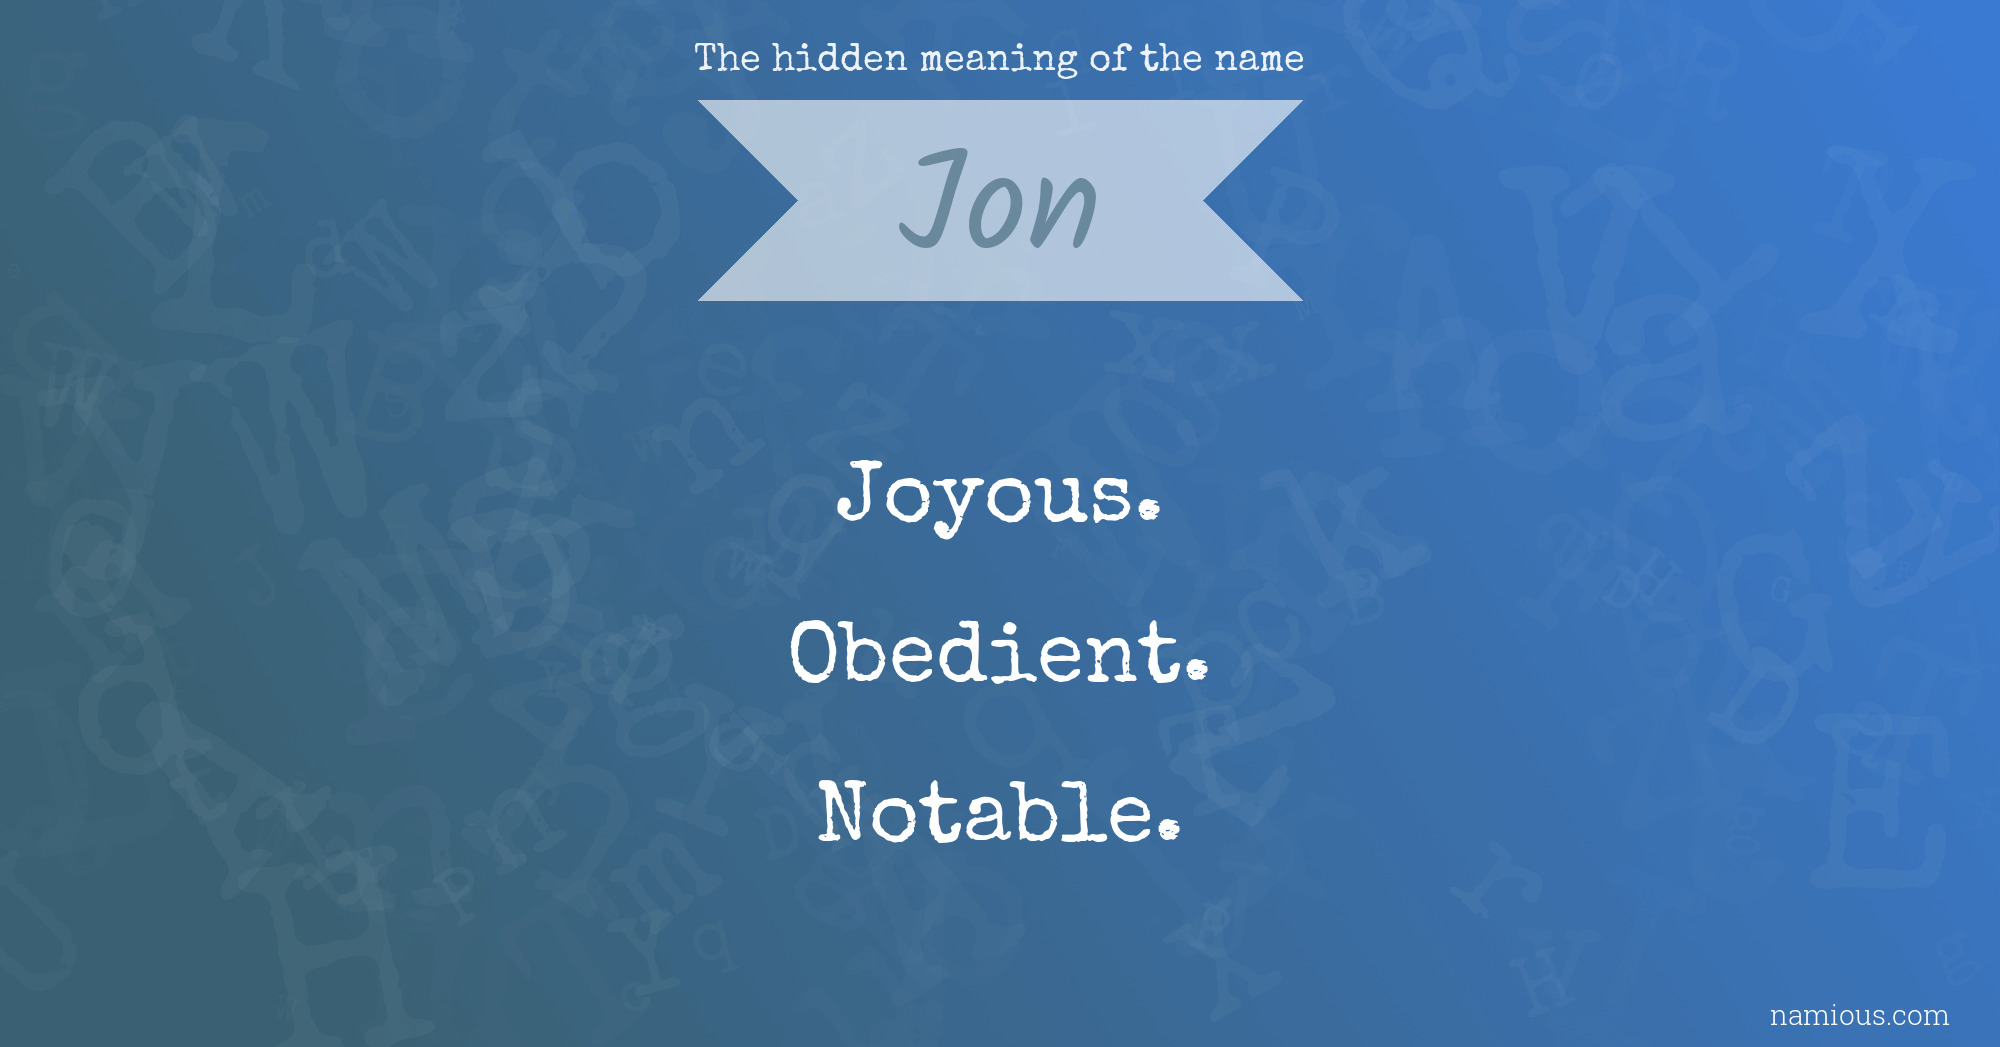 The hidden meaning of the name Jon